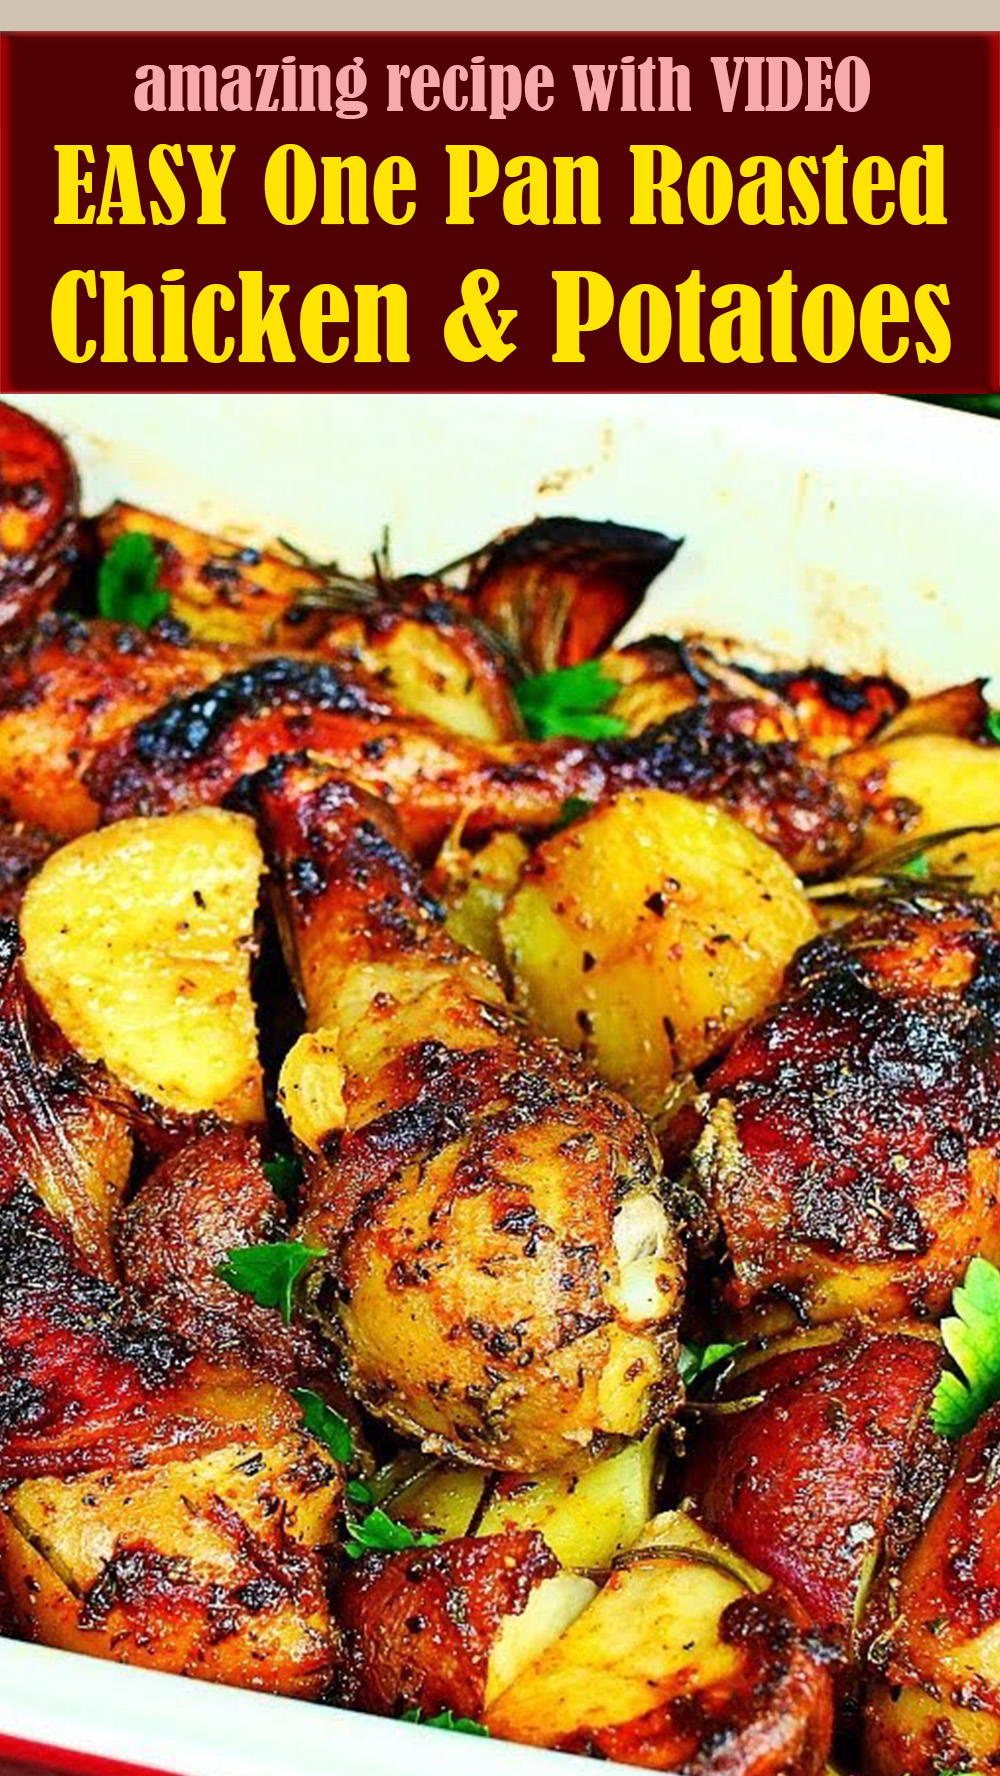 EASY One Pan Roasted Chicken and Potatoes